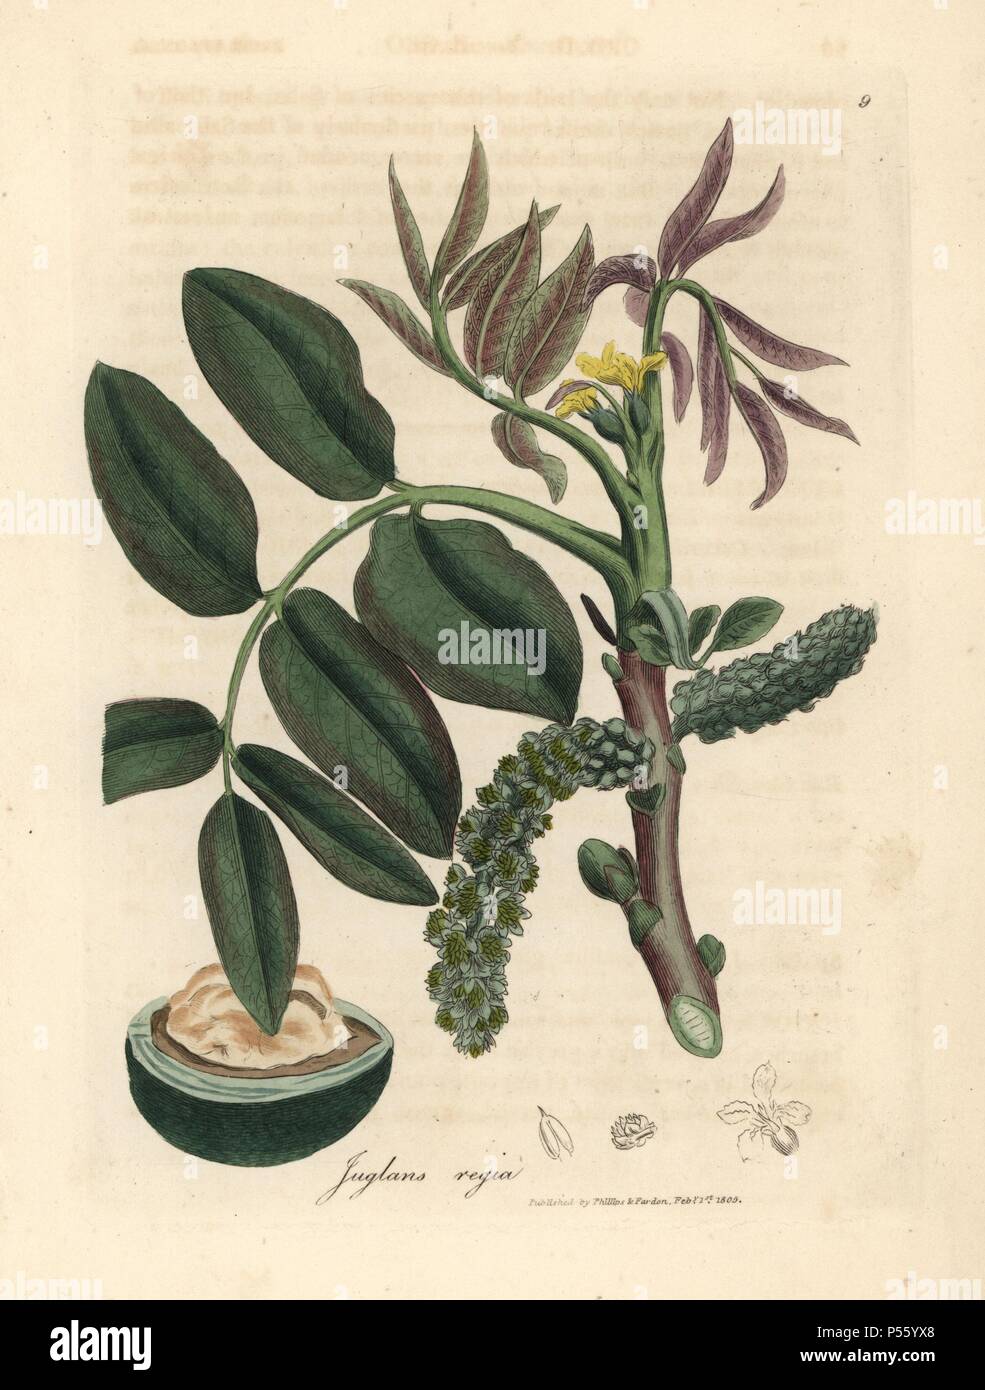 Leaves, yellow flower and nut of the common walnut tree, Juglans regia. Handcolored copperplate engraving from a botanical illustration by James Sowerby from William Woodville and Sir William Jackson Hooker's 'Medical Botany' 1832. The tireless Sowerby (1757-1822) drew over 2,500 plants for Smith's mammoth 'English Botany' (1790-1814) and 440 mushrooms for 'Coloured Figures of English Fungi ' (1797) among many other works. Stock Photo